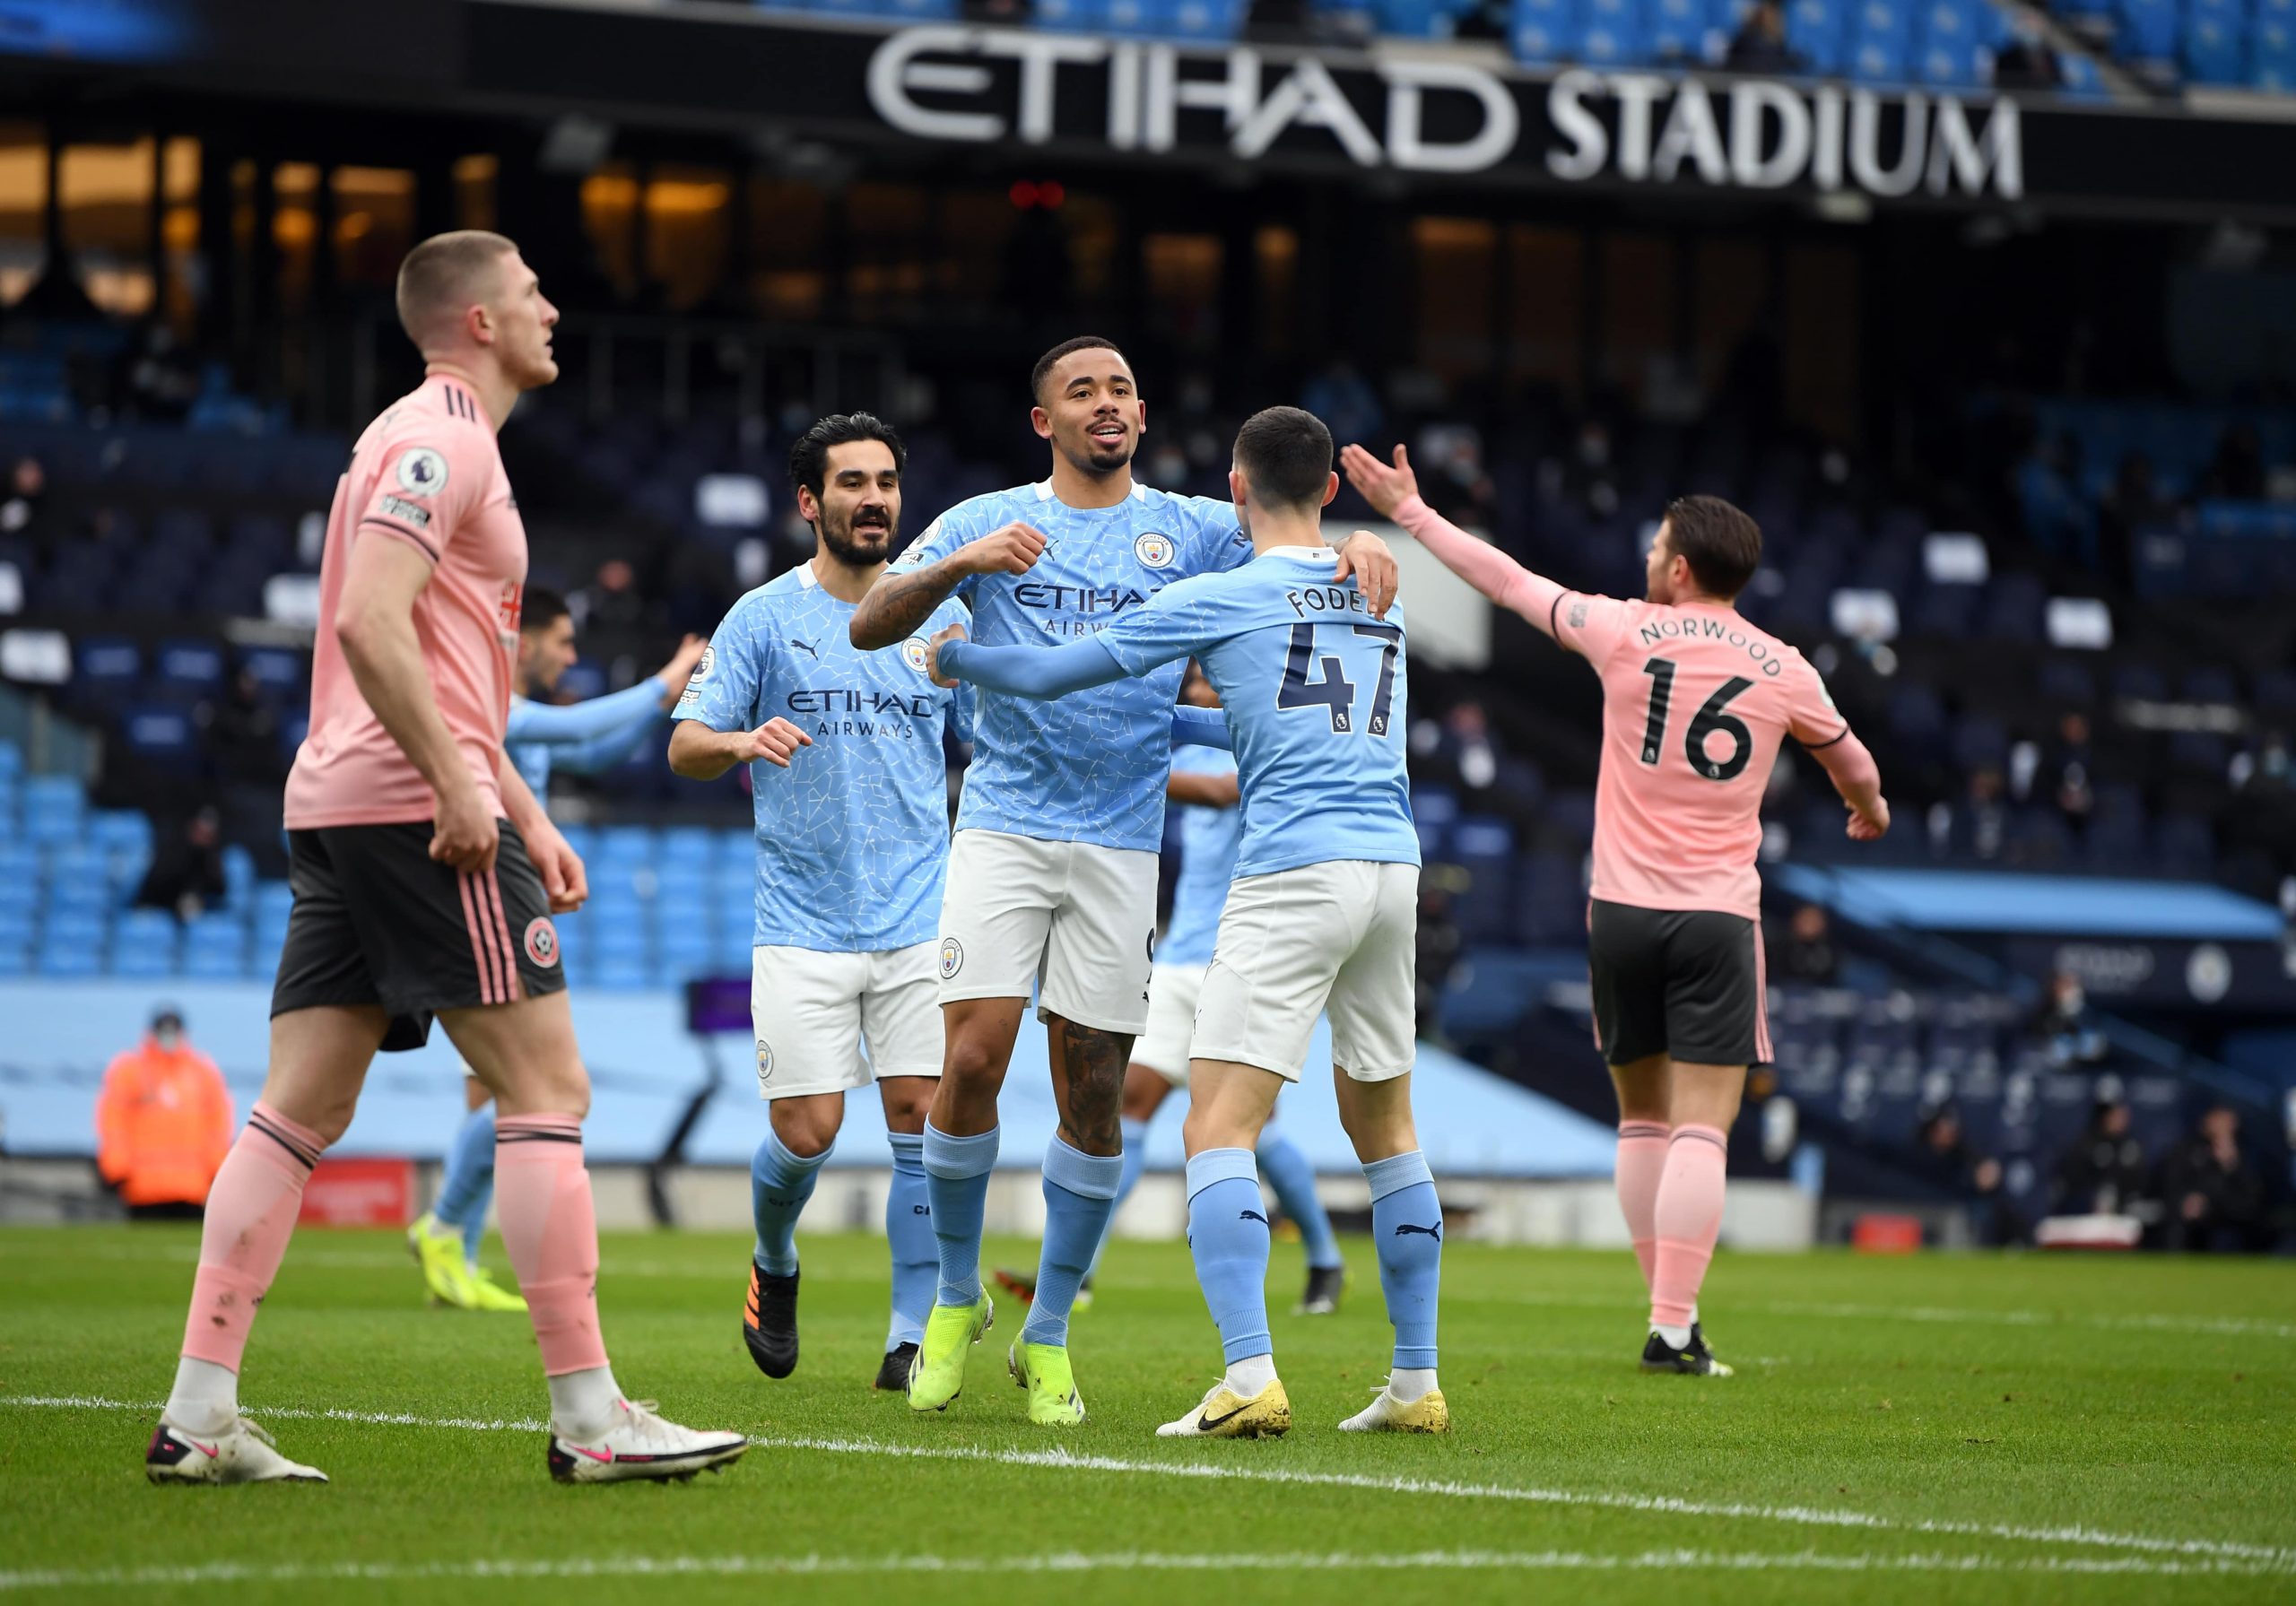 Manchester City's Gabriel Jesus celebrates scoring the opening goal of the game with Phil Foden during the Premier League match at Etihad Stadium, Manchester.